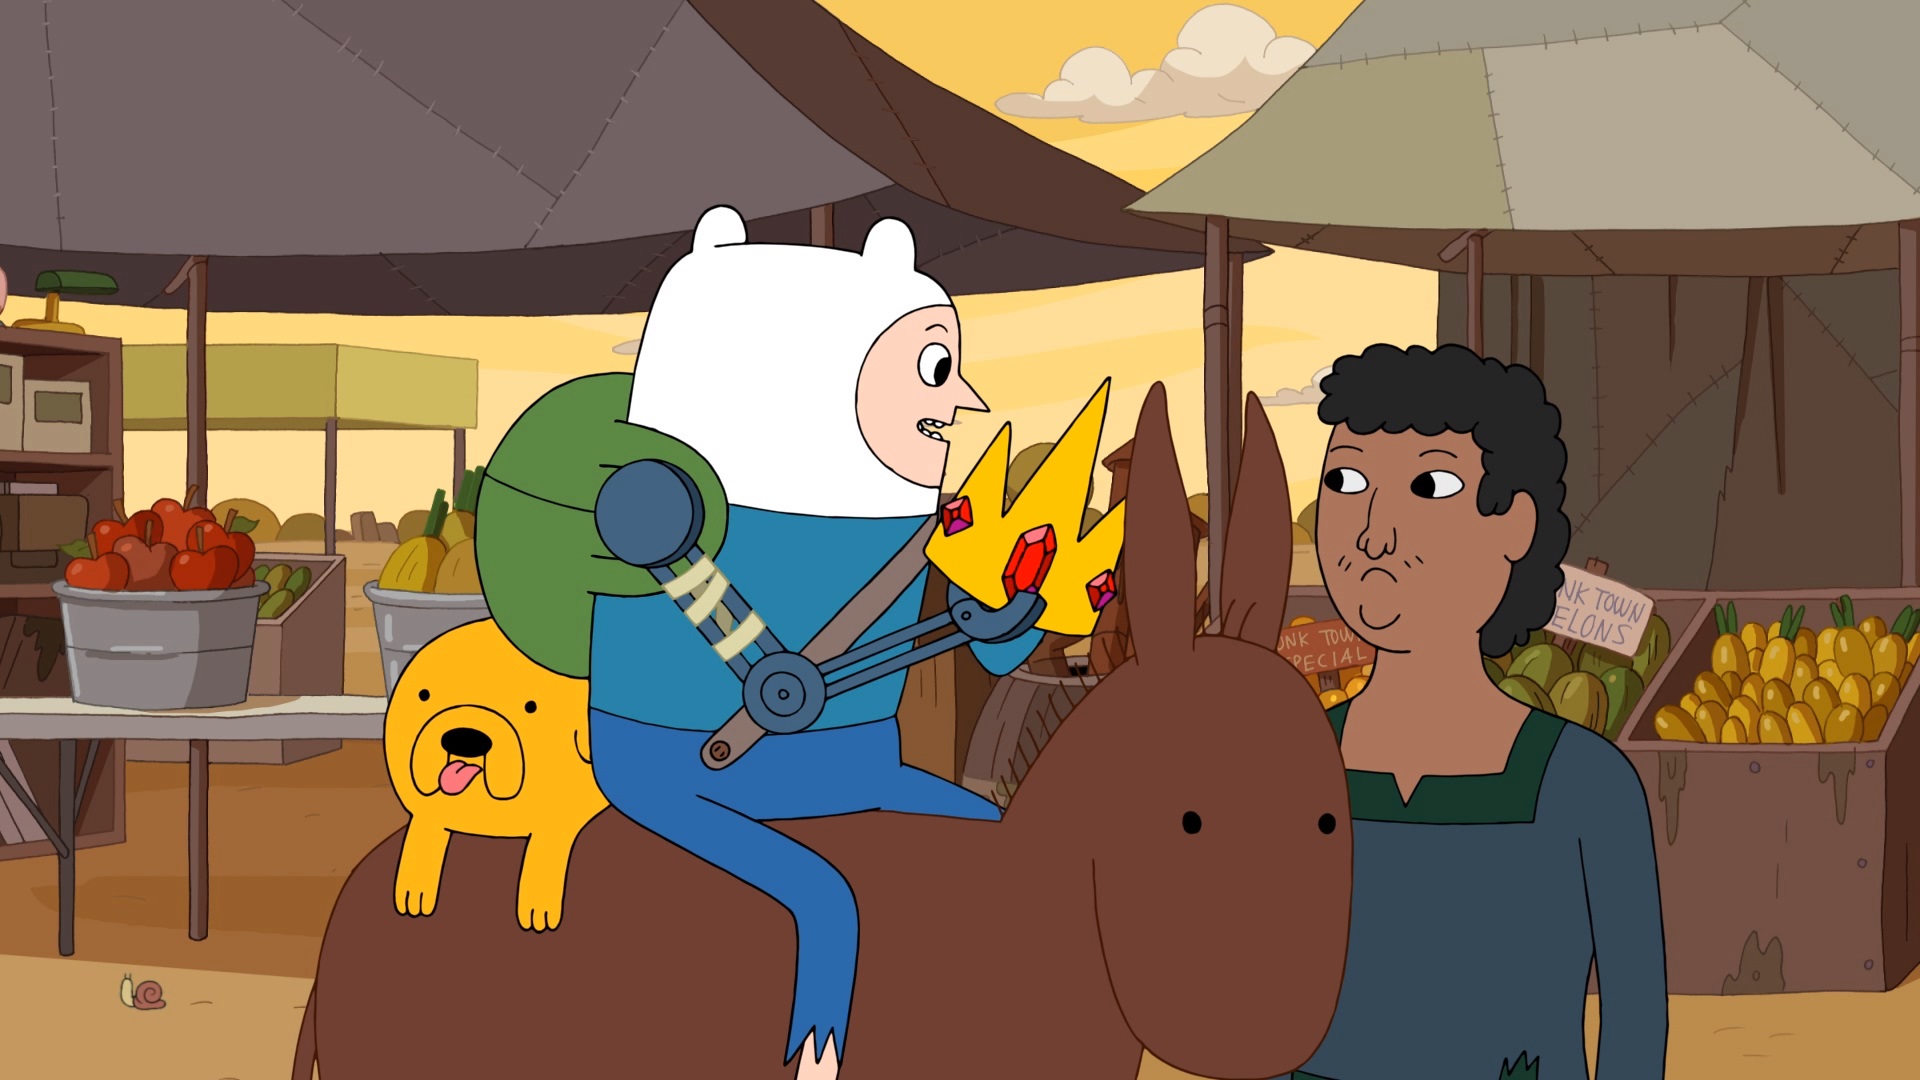 Adventure Time: The Complete Fifth Season (Blu-ray) : DVD Talk Review